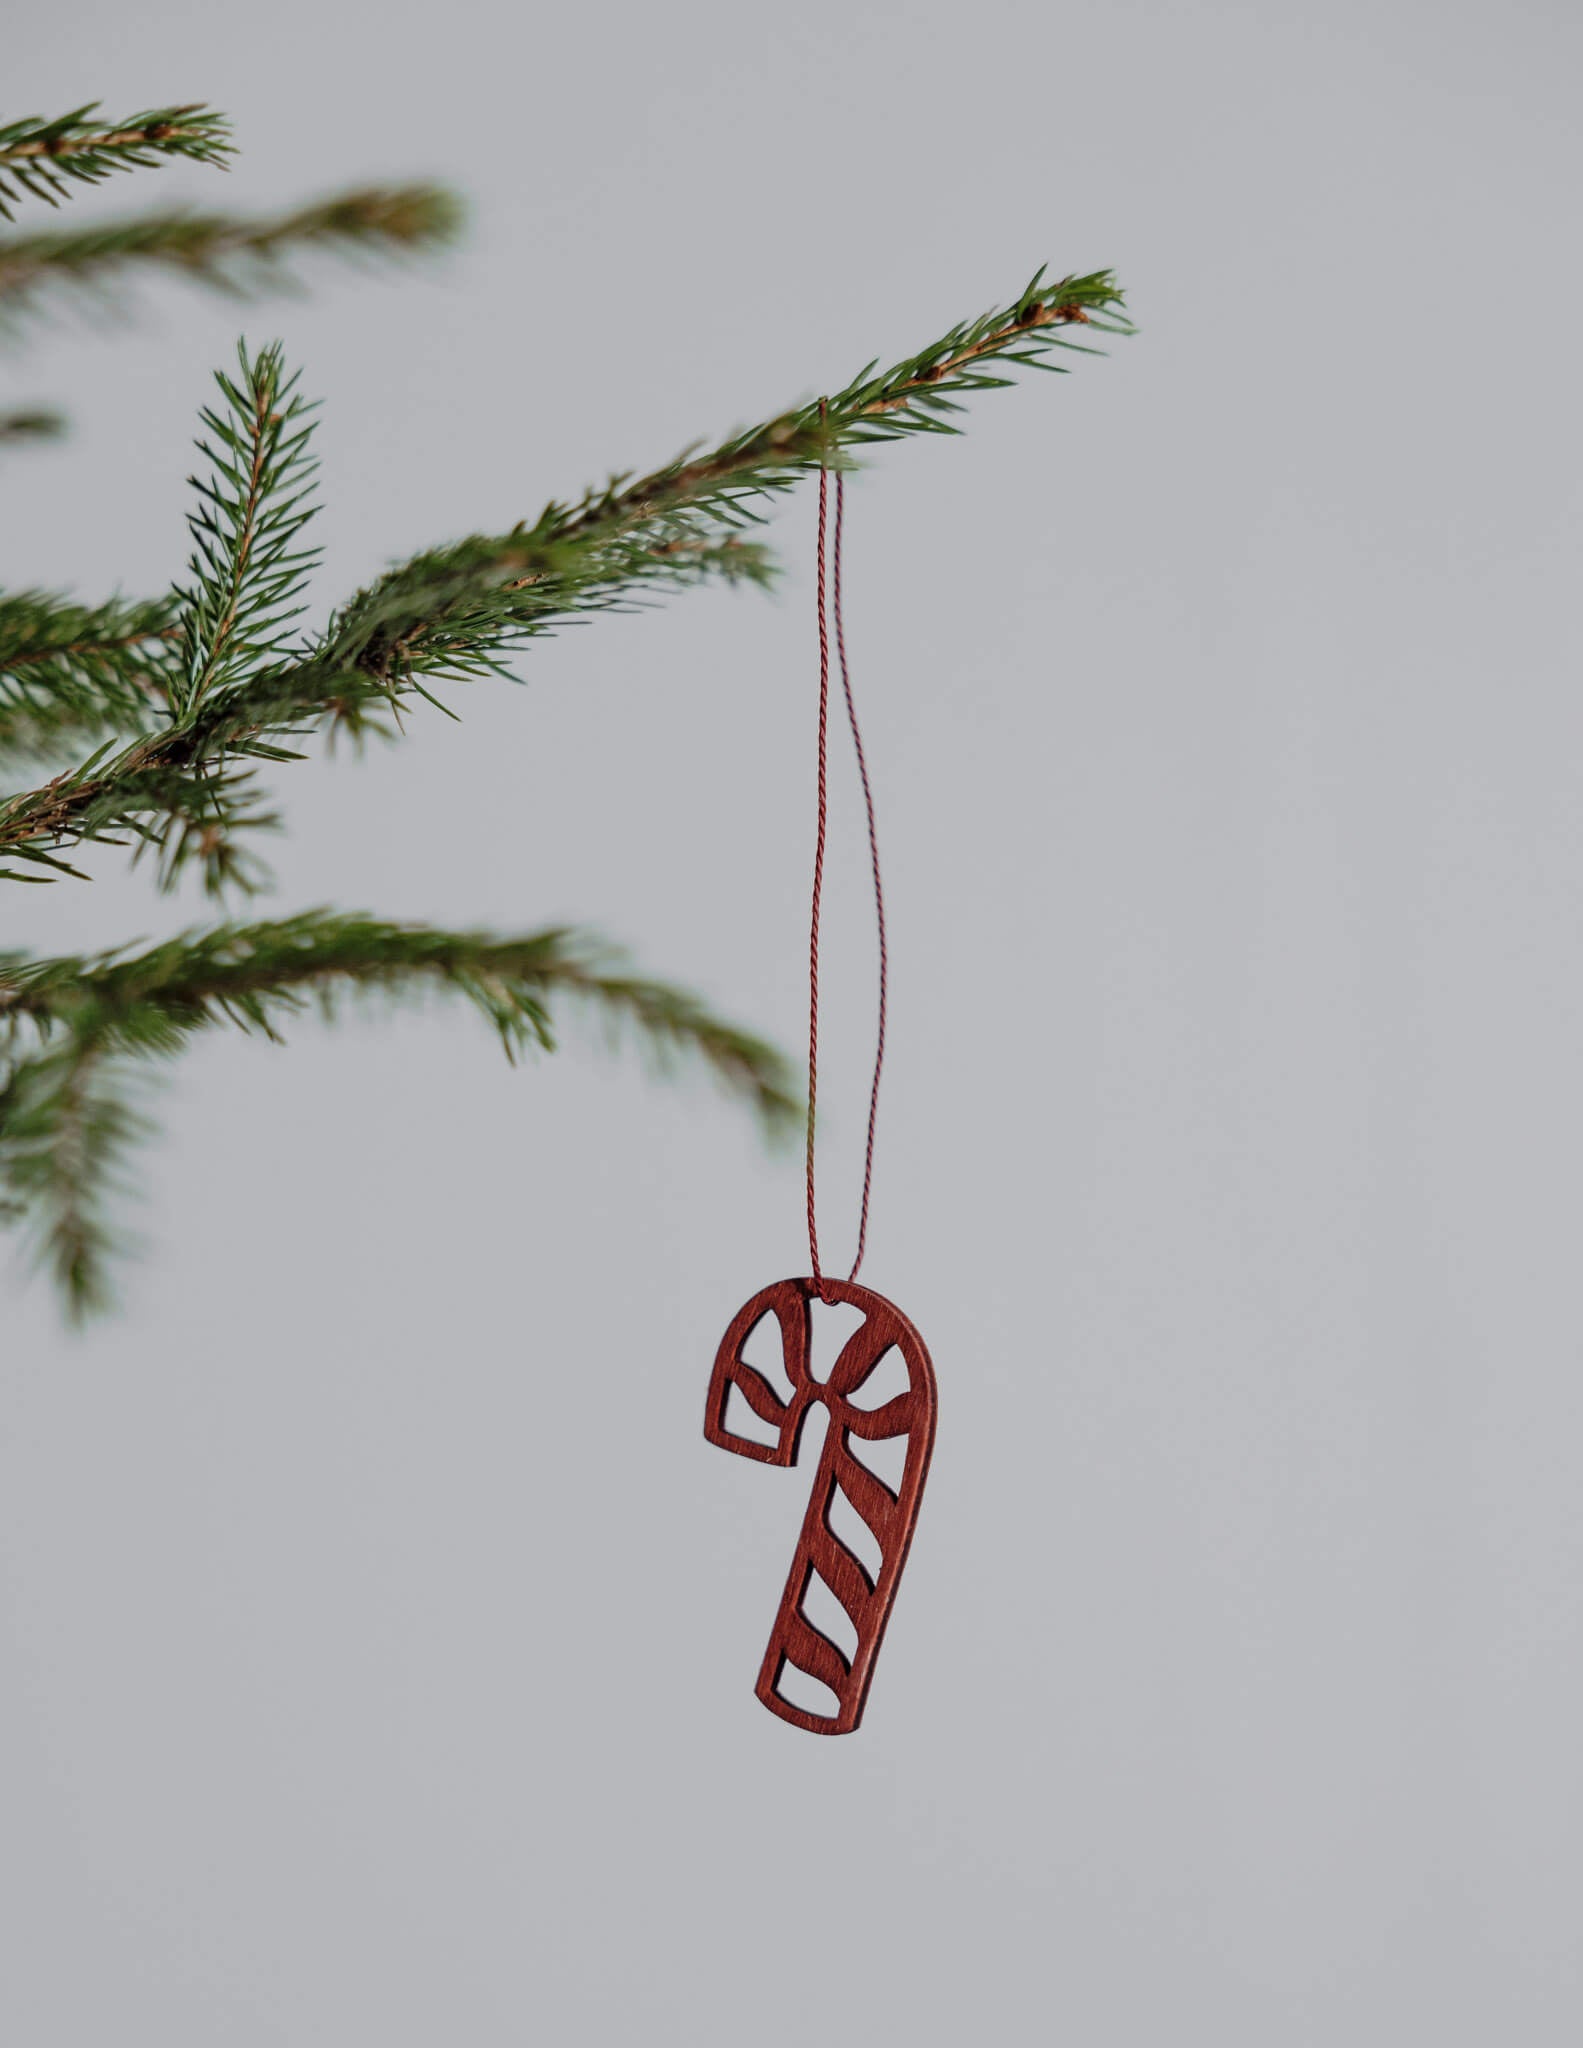 Krokom Candy Cane Decoration | Red | by Storefactory - Lifestory